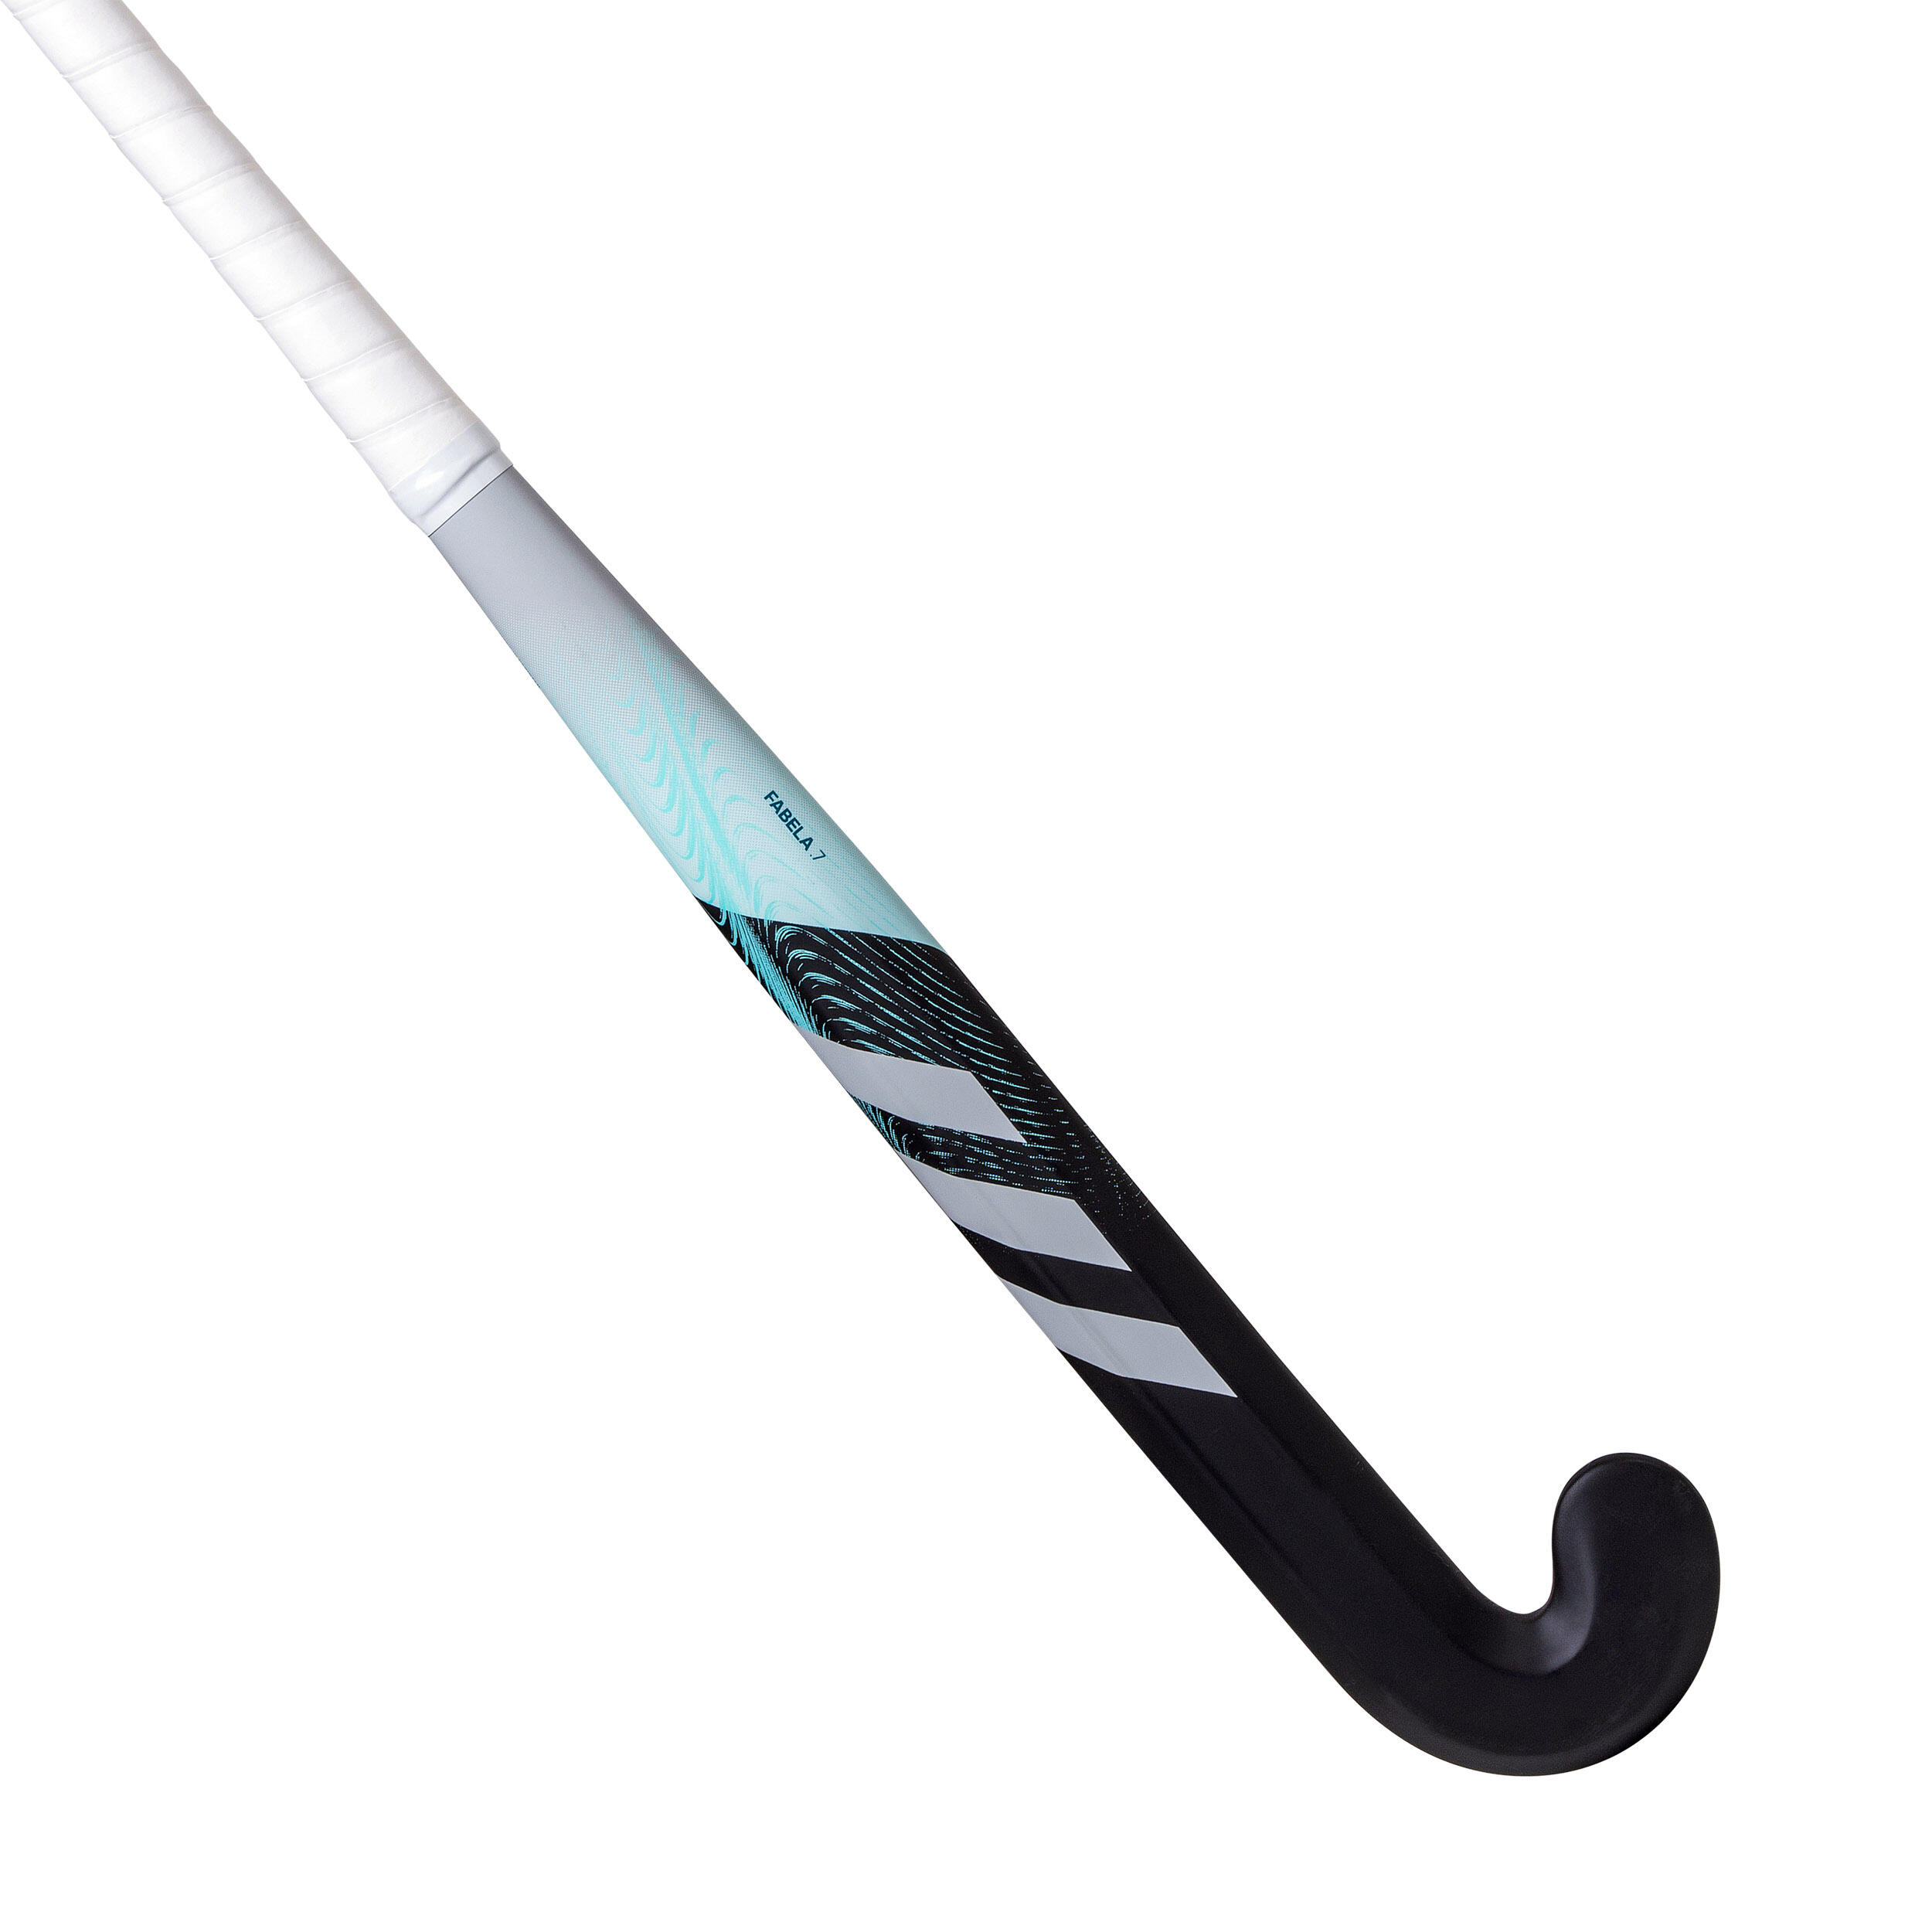 Adult Intermediate 20% Carbon Mid Bow Field Hockey Stick Fabela .7 - Black/Turquoise 3/12